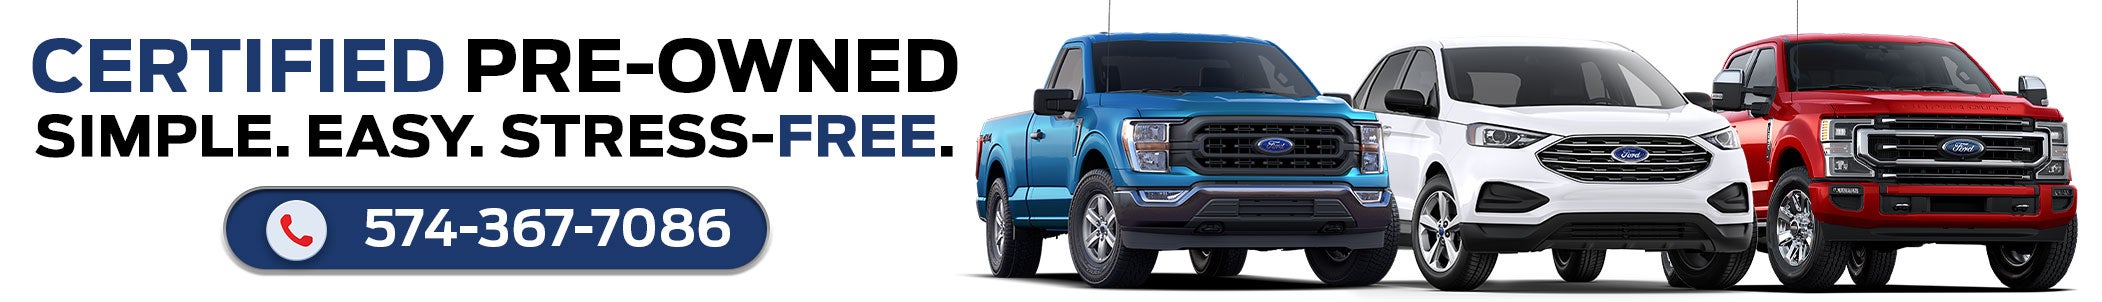 Certified Pre-Owned Ford at Jordan Ford in Mishawaka, IN